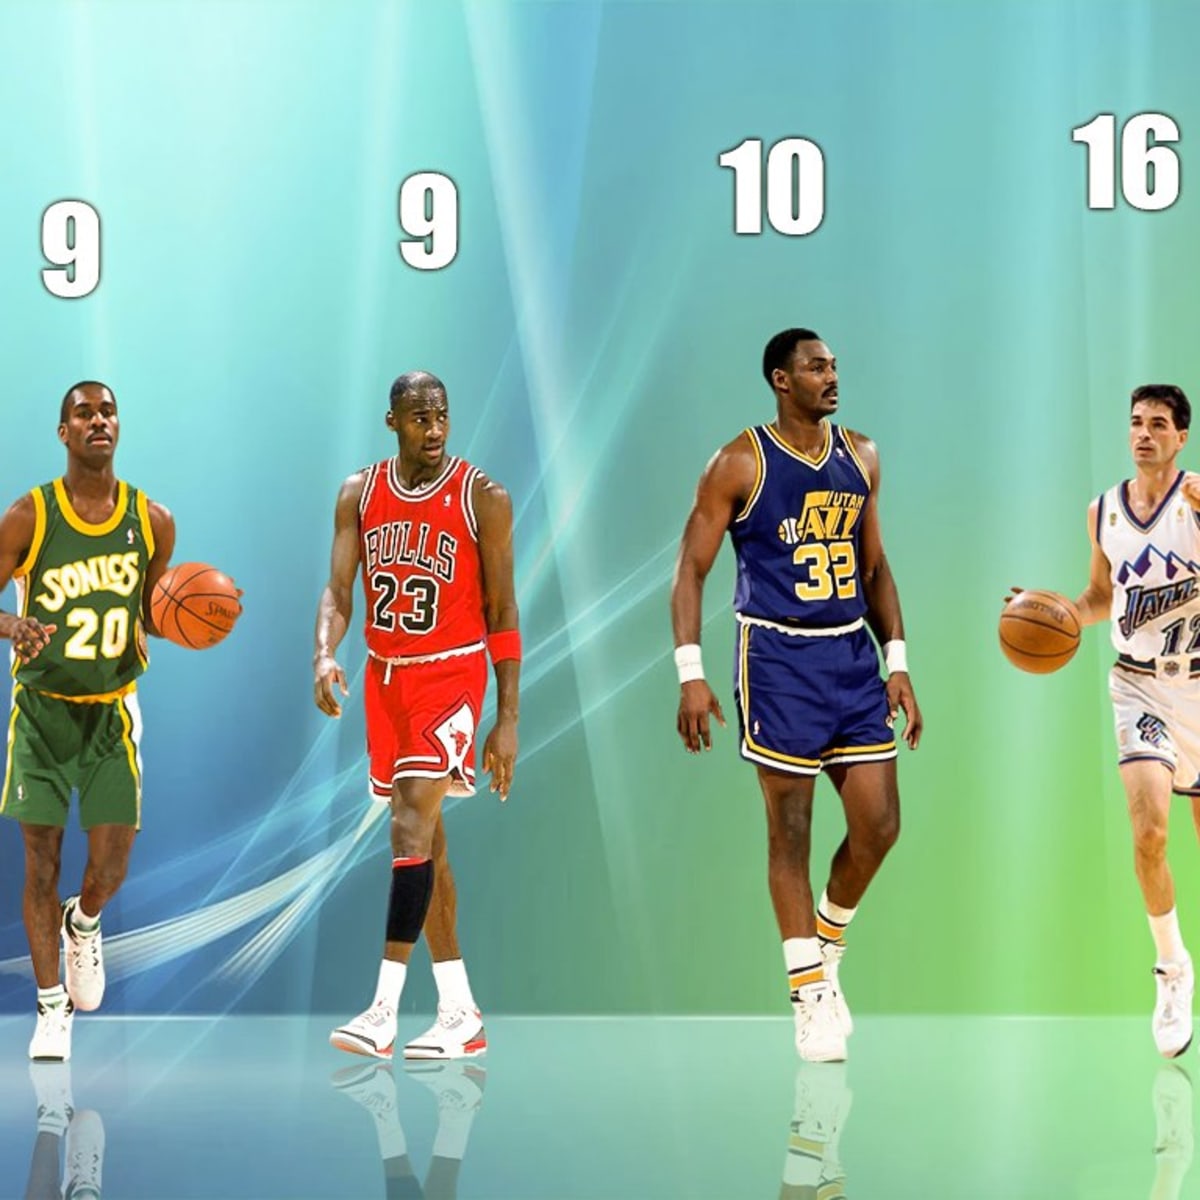 5 Players with the most minutes played in NBA history